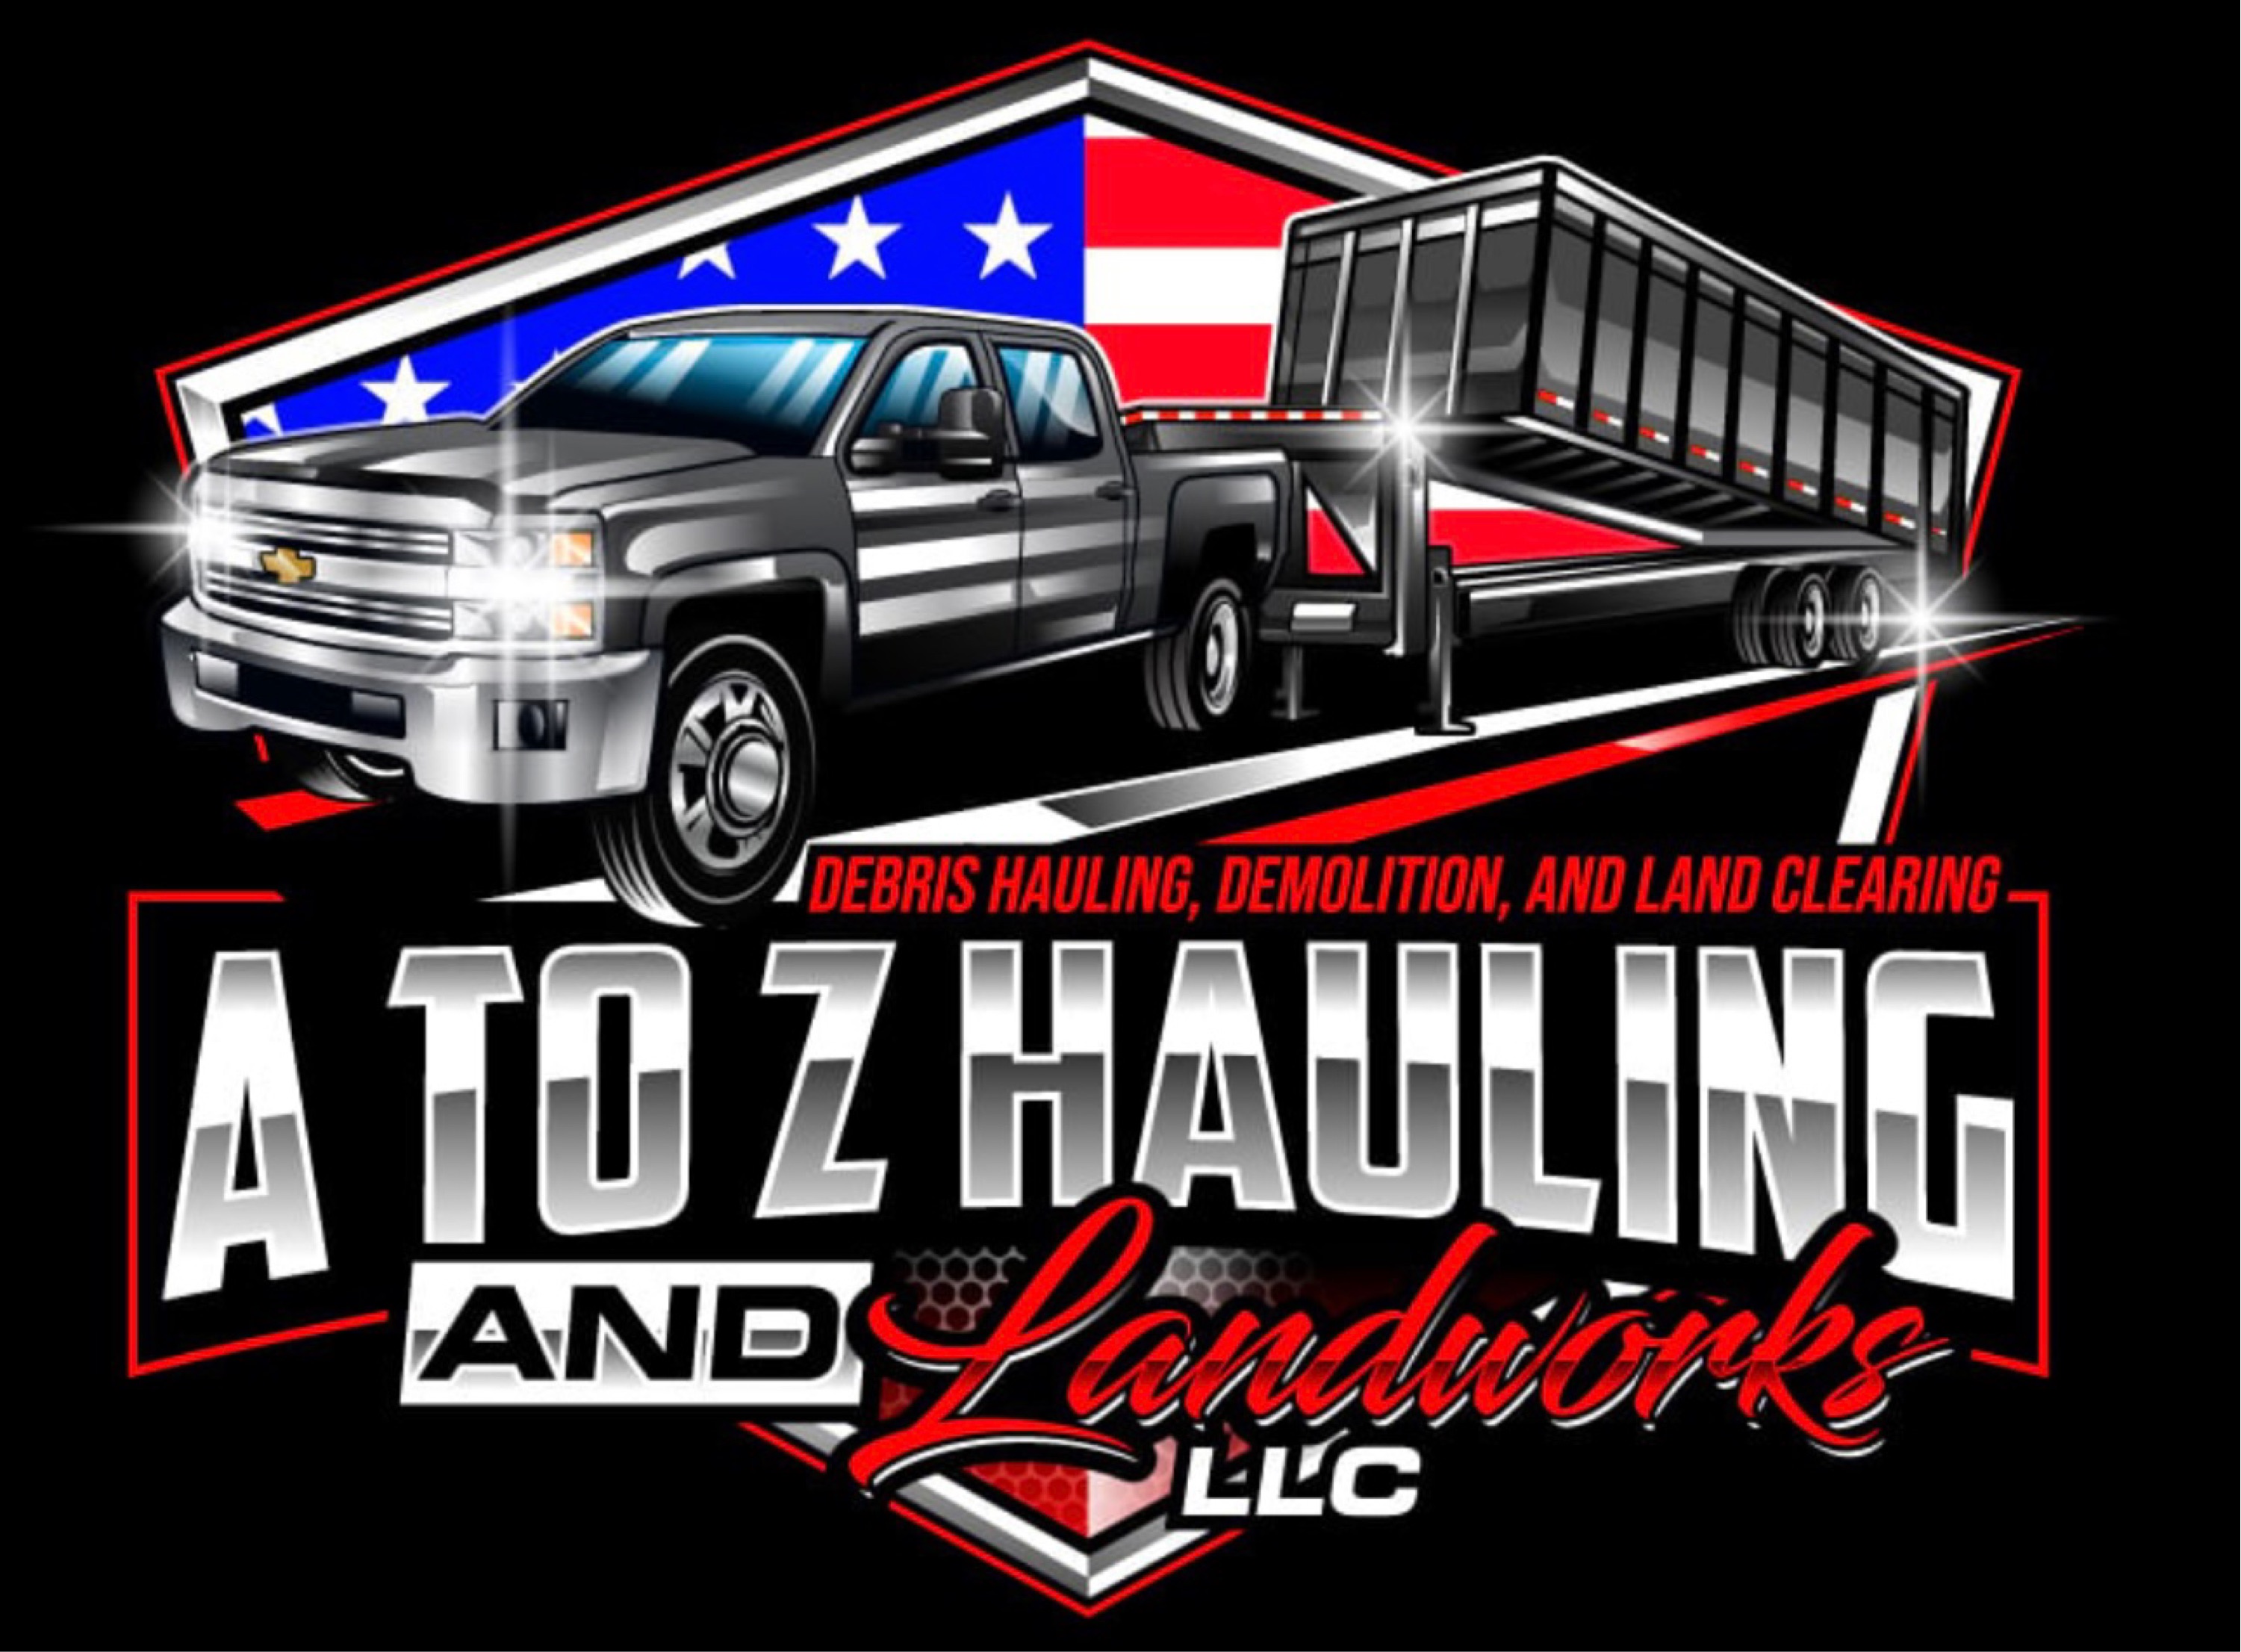 A To Z Hauling and Landworks LLC Logo